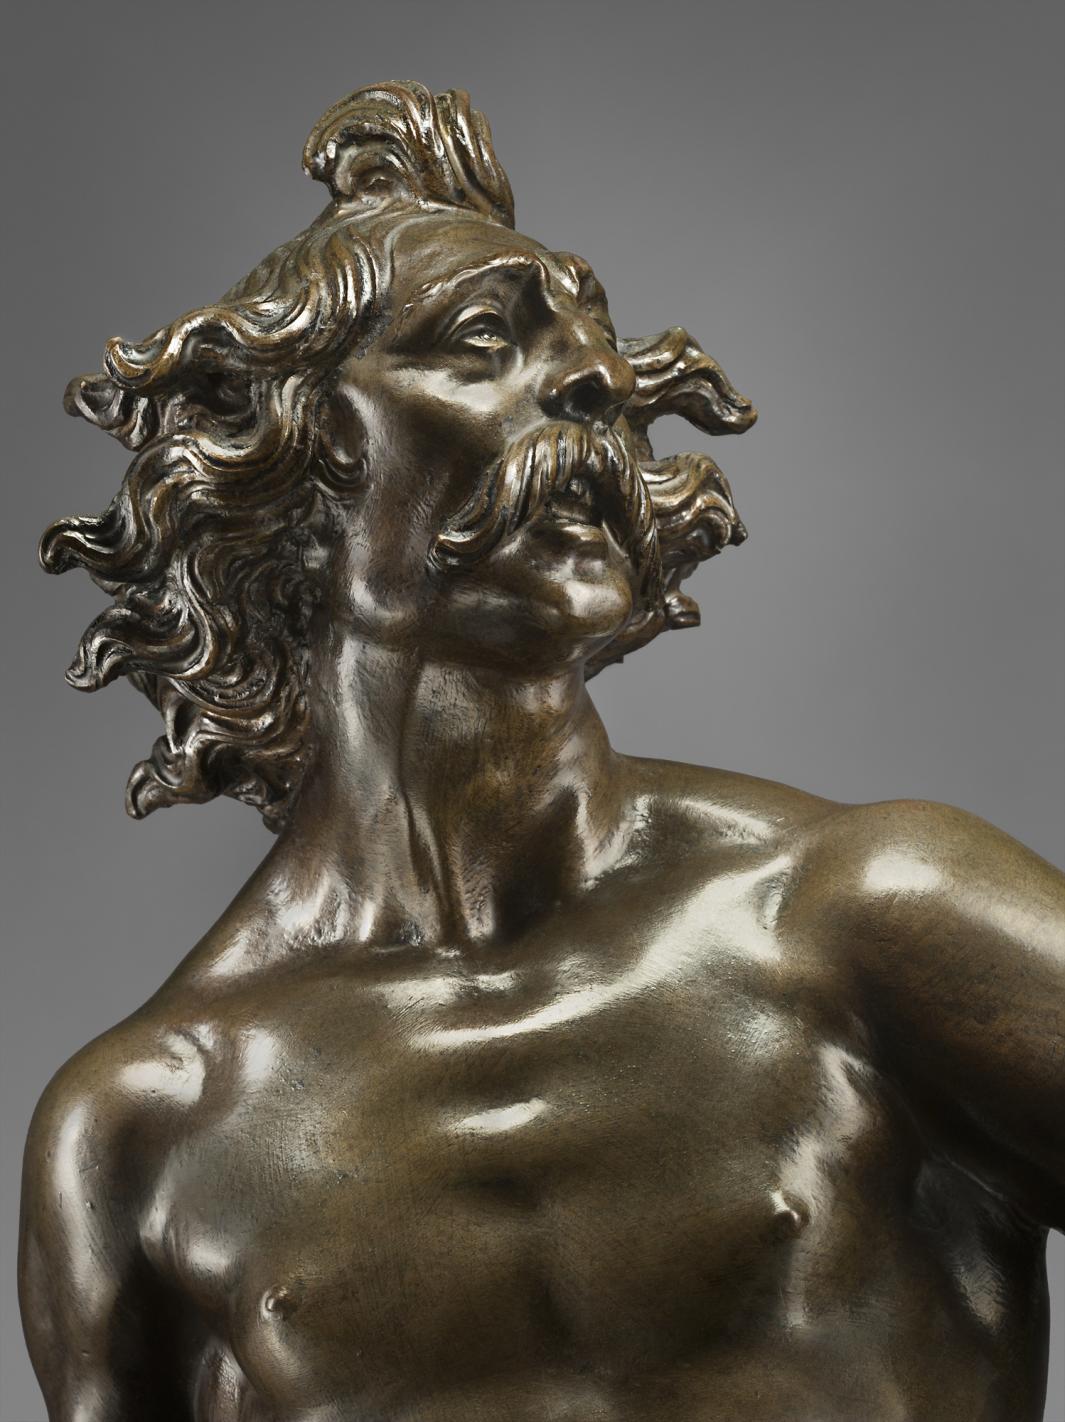 Bronze statue of man striding forward, close up of face.